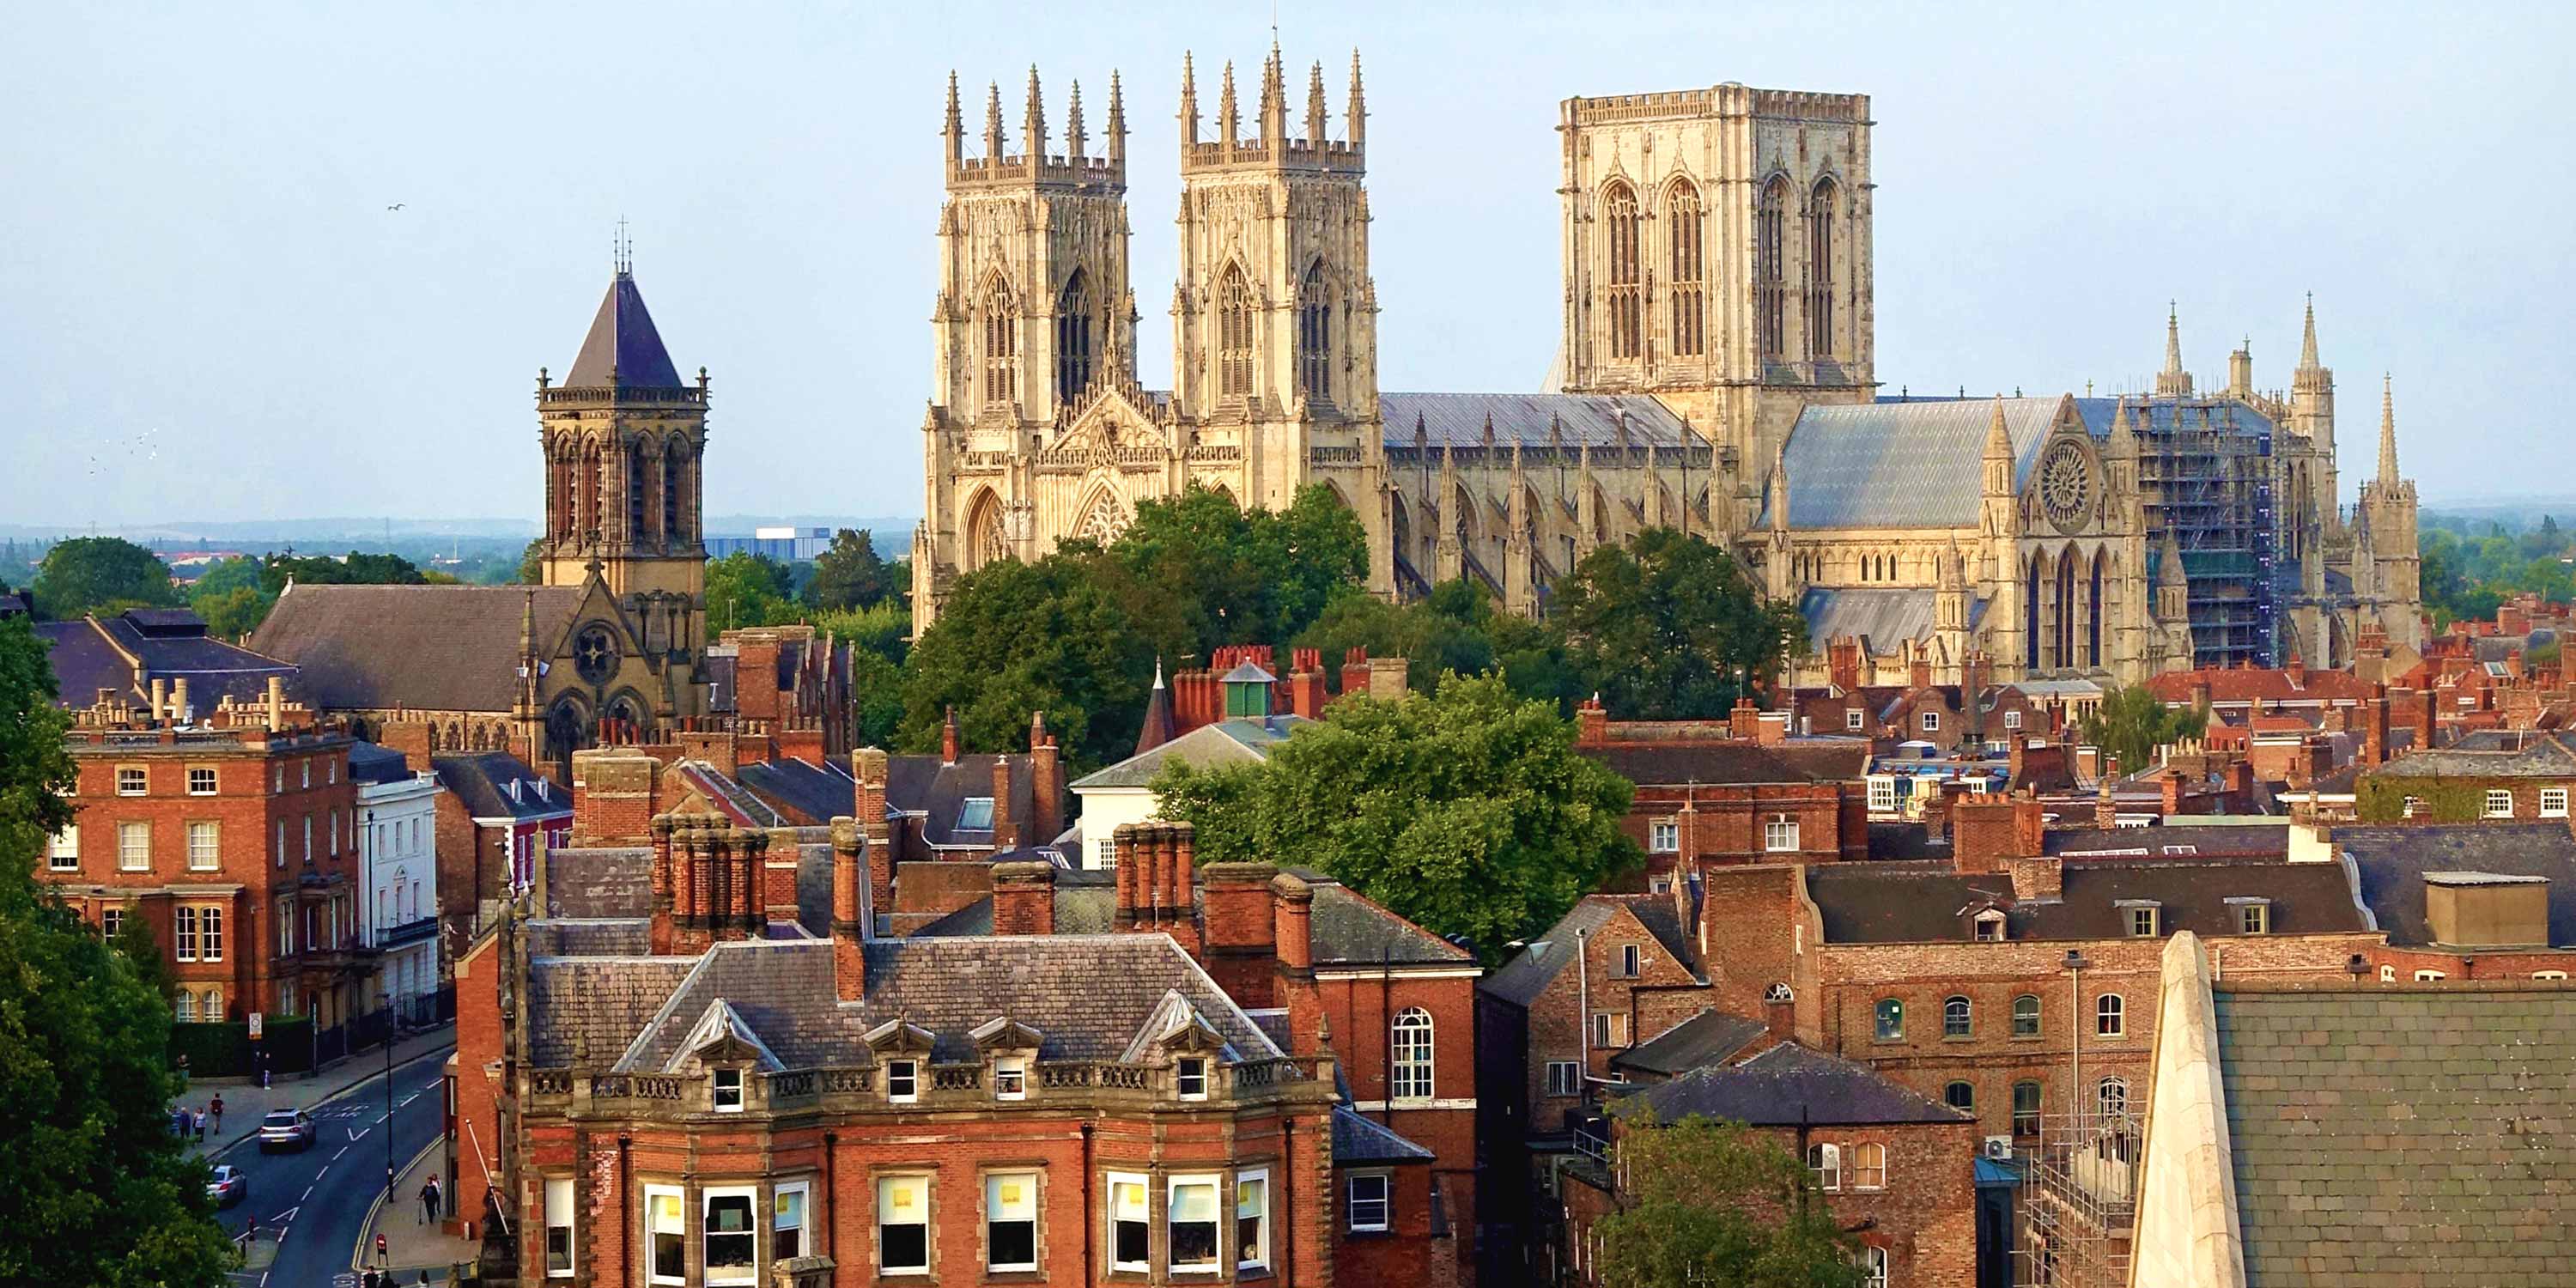 A panoramic view of York City Skyline. The cathedral can be seen in the middle.